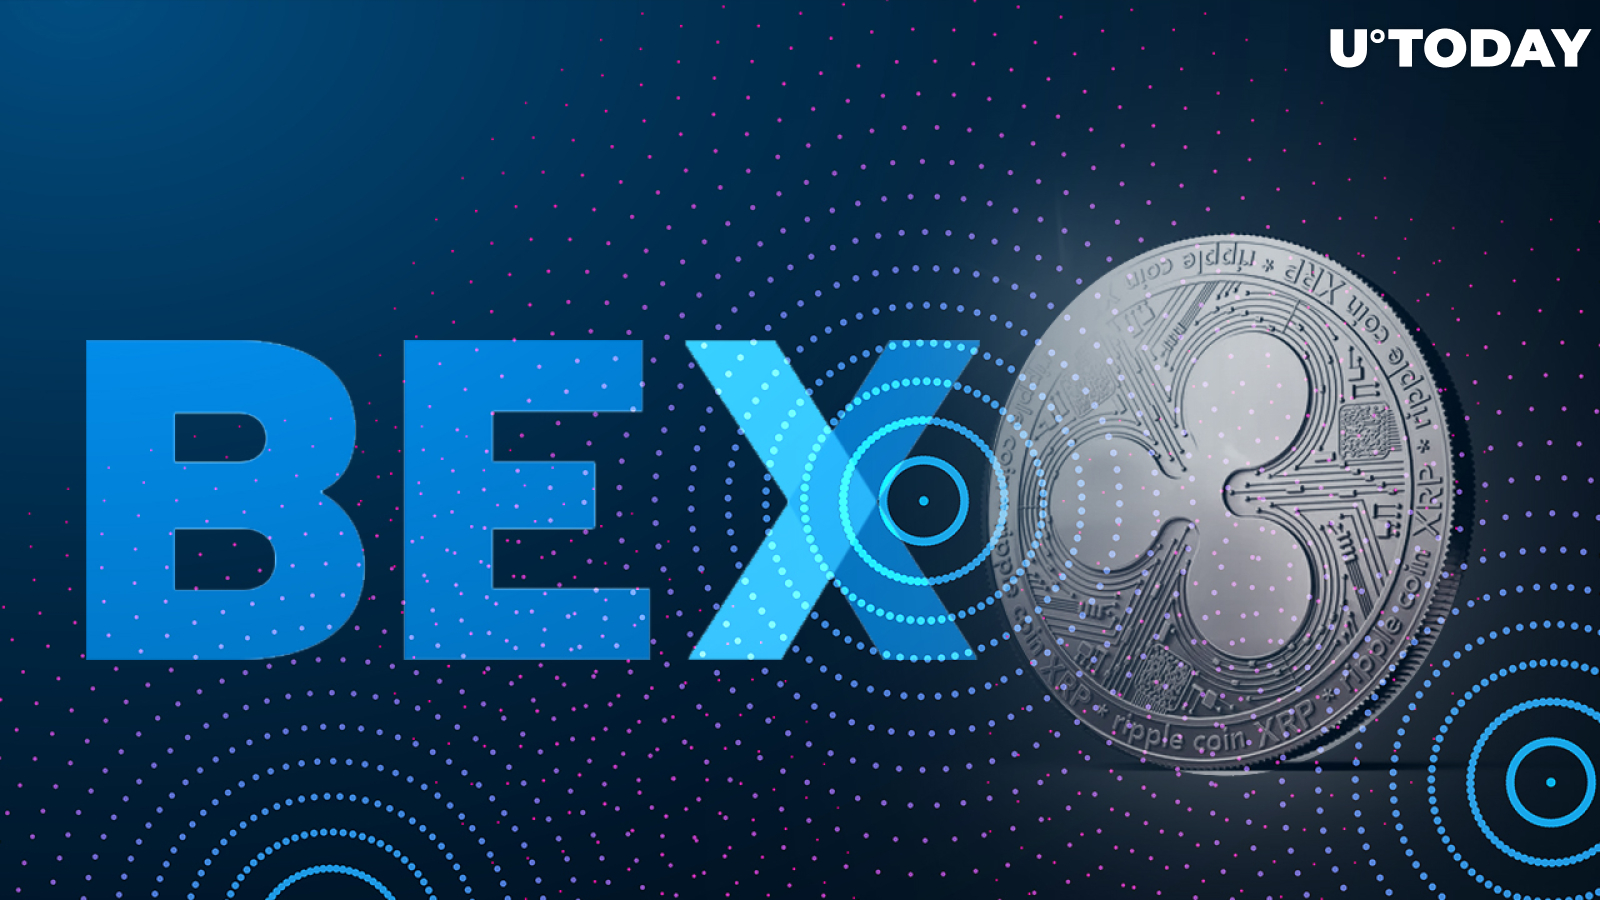 Ripple-Based Remittances Now Available to 54 Million Customers per New Bexs Partnership